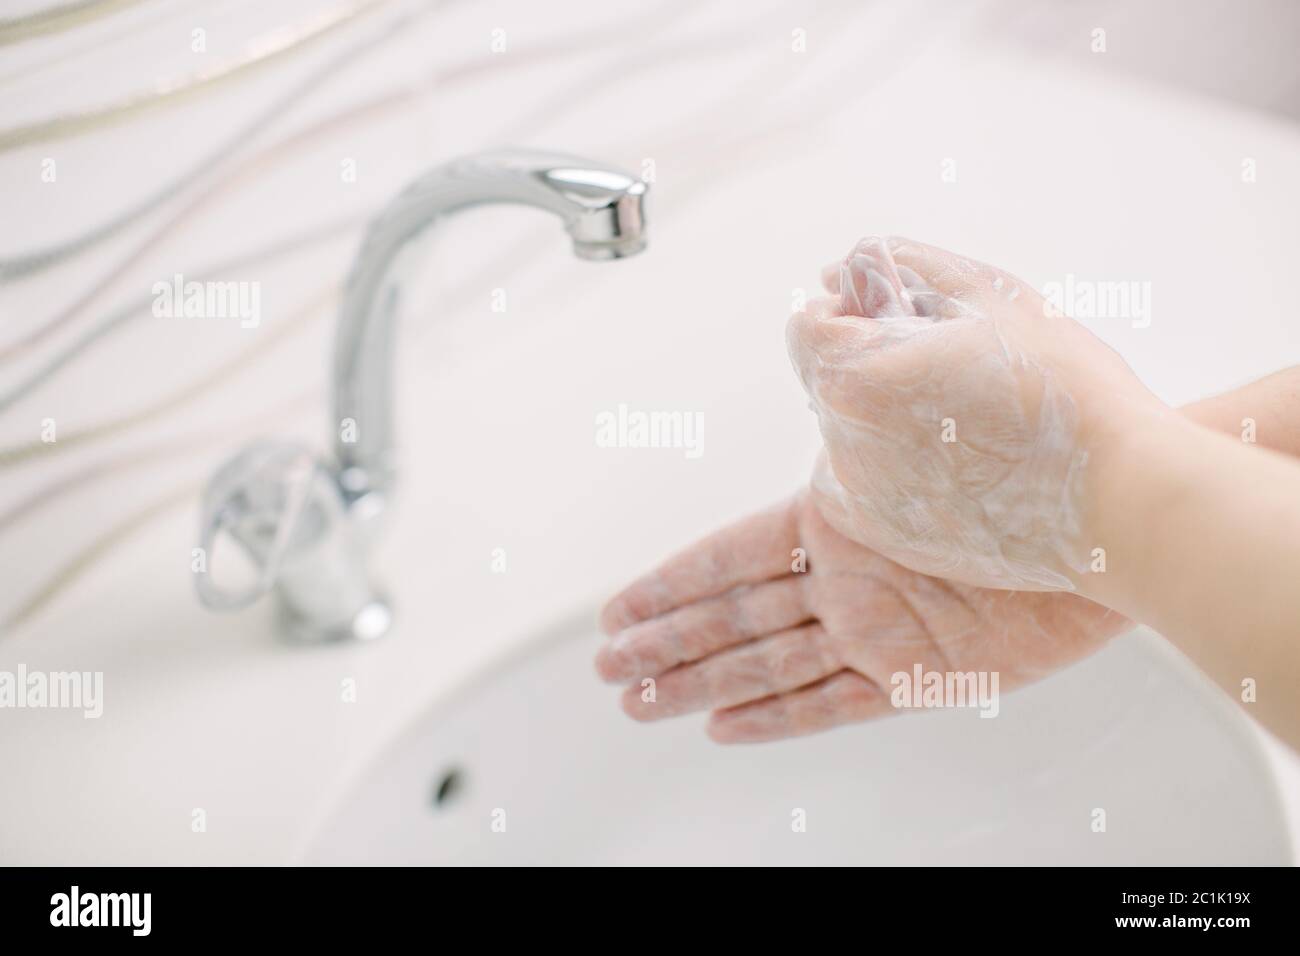 Woman washes her hands by surgical hand washing method. Stock Photo